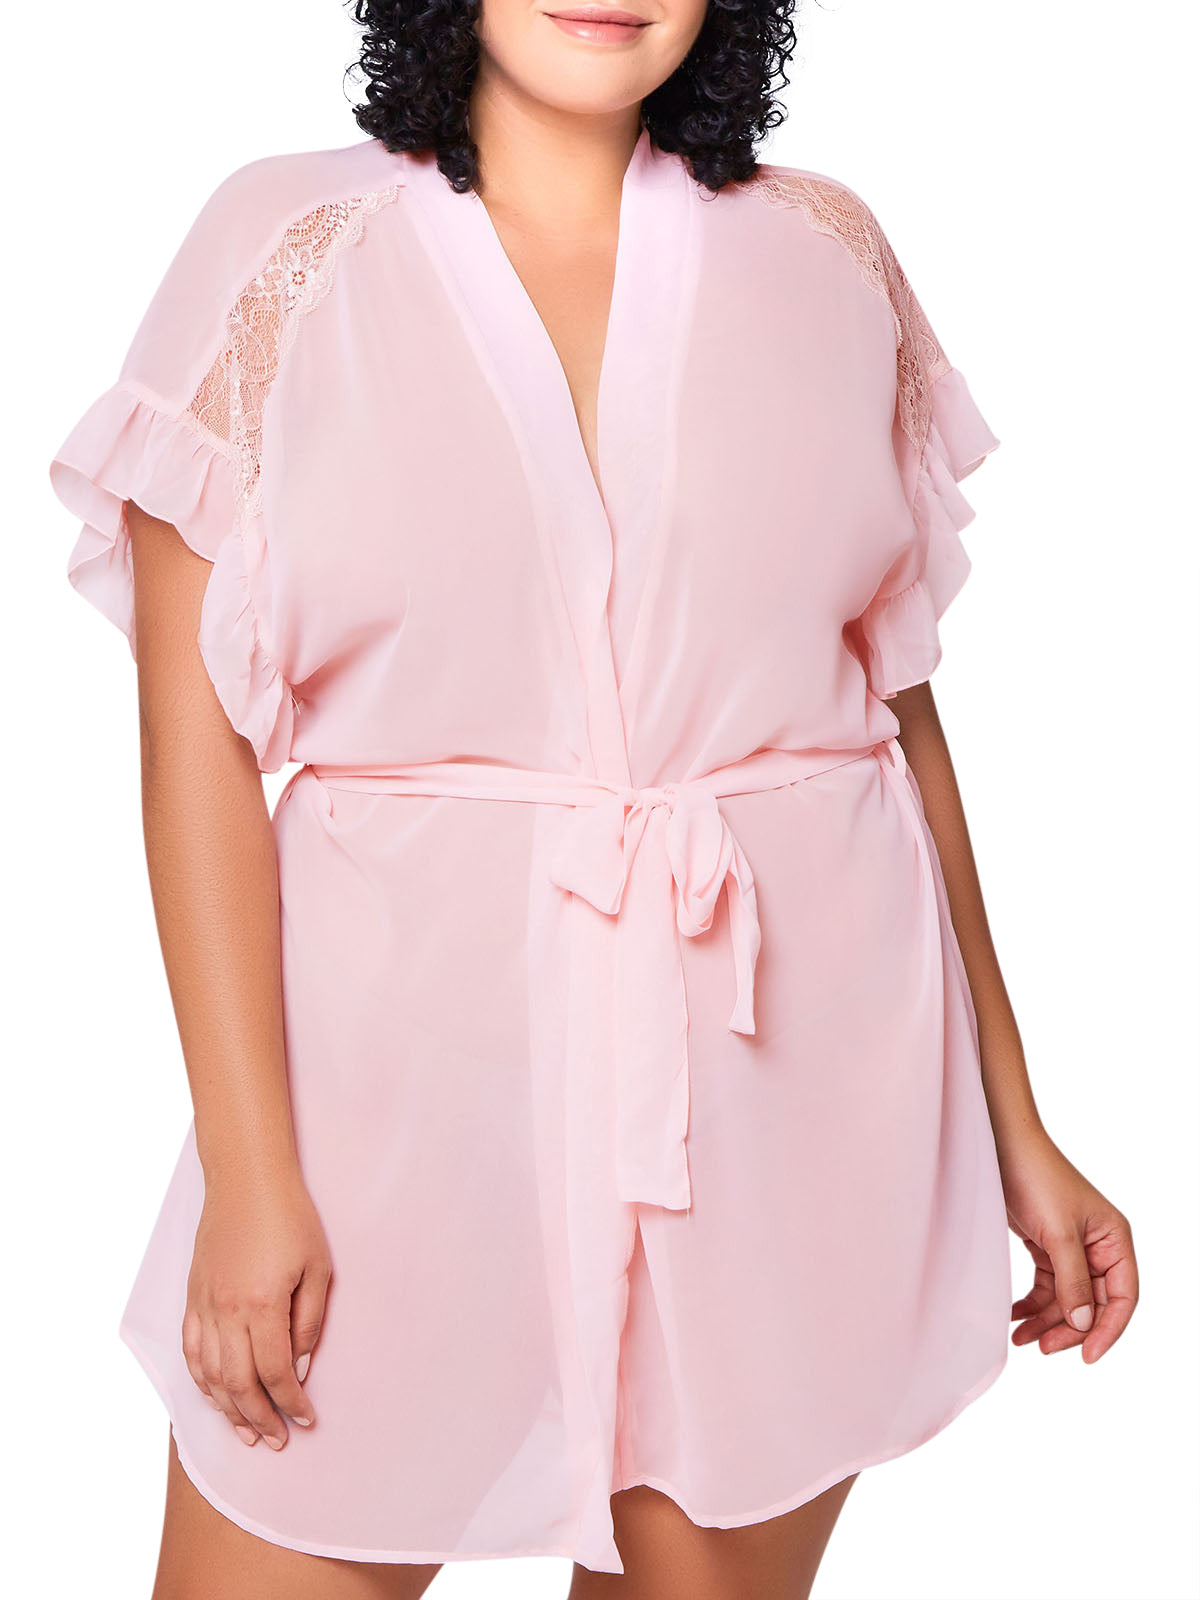 iCollection Plus Size Robes Amelie Plus Size Robe